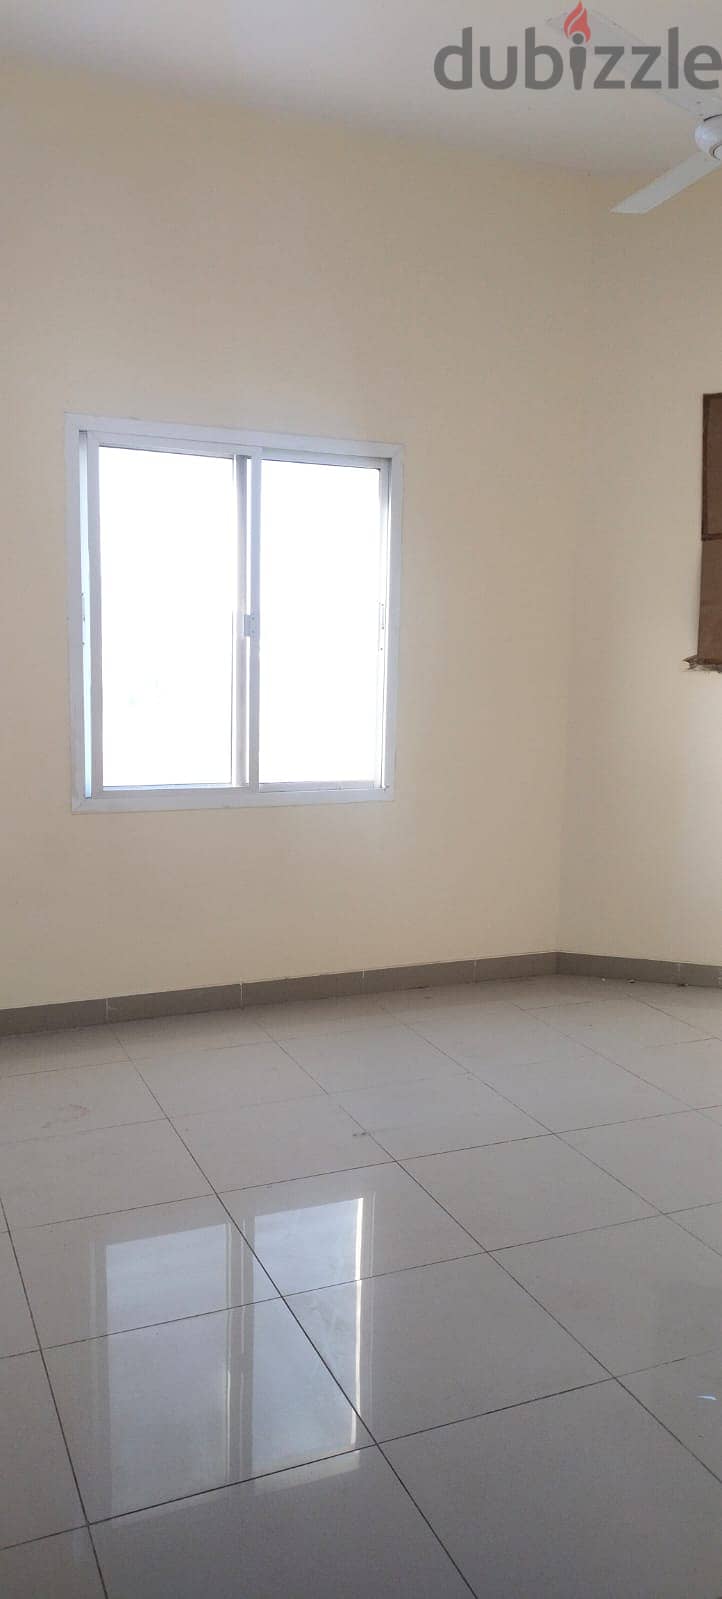 Flat 2 BHK For Rent in Hond road in Ruwi 2